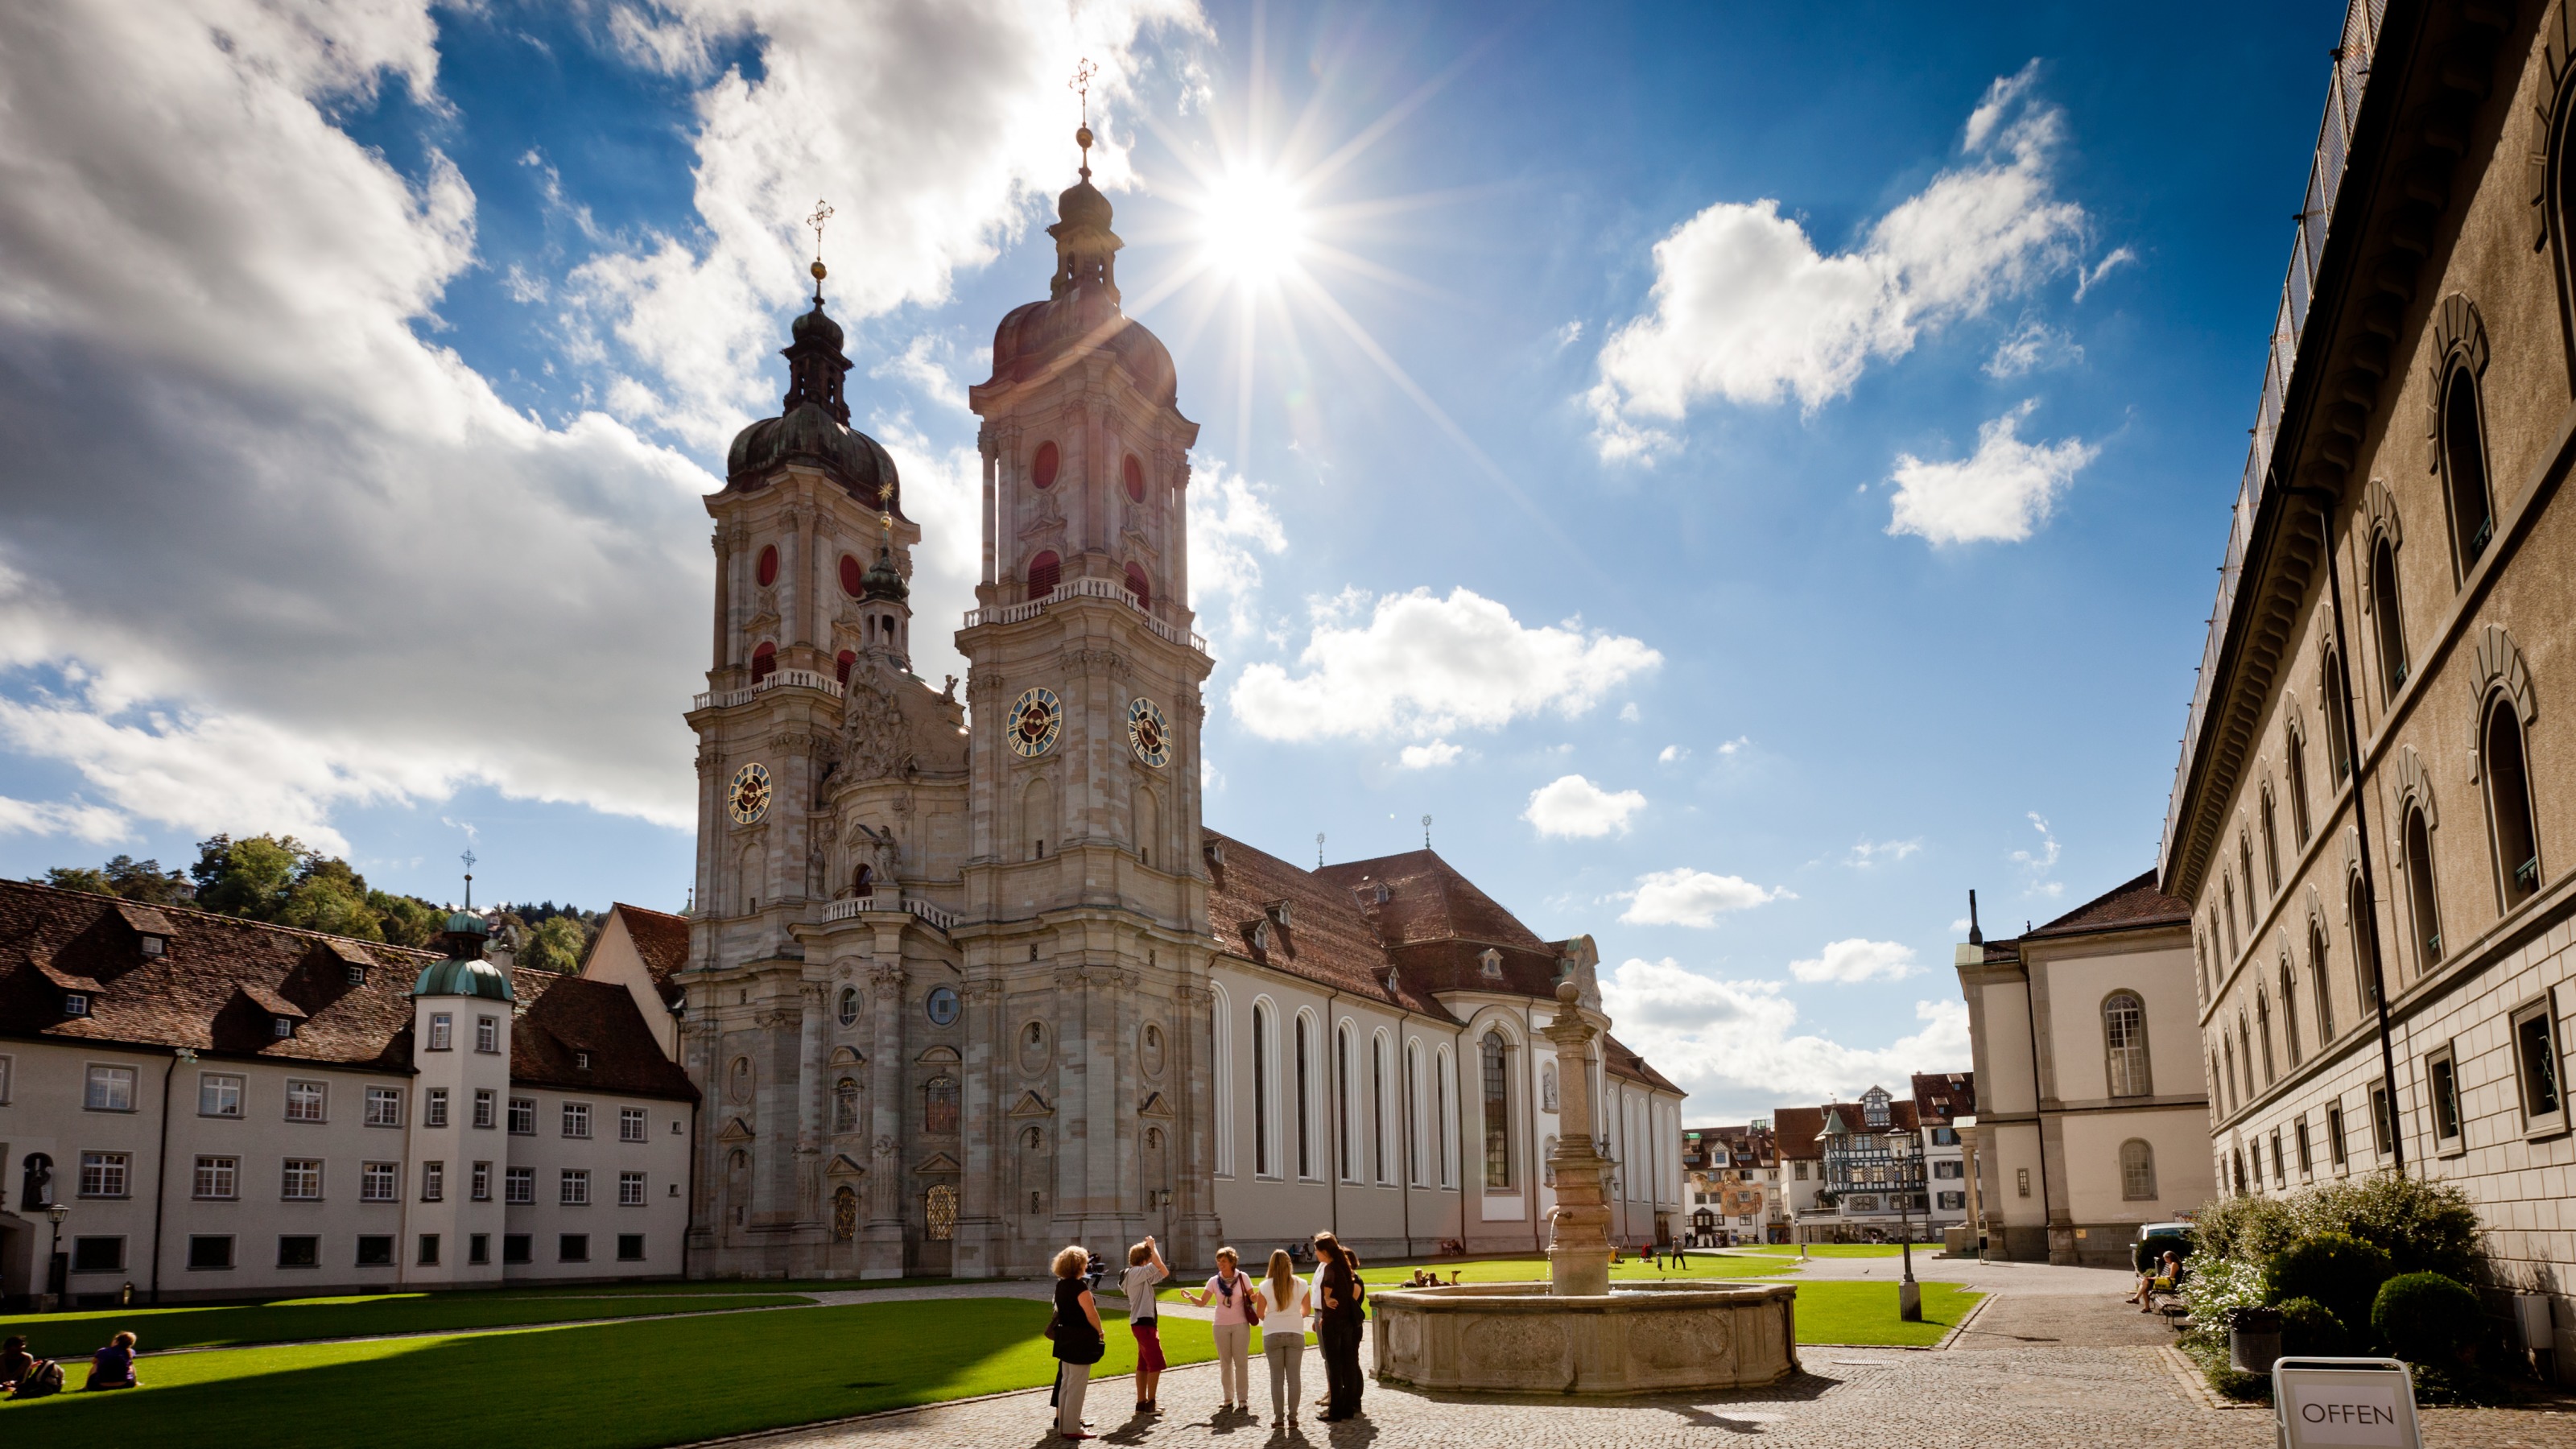 Image of the city of St. Gallen